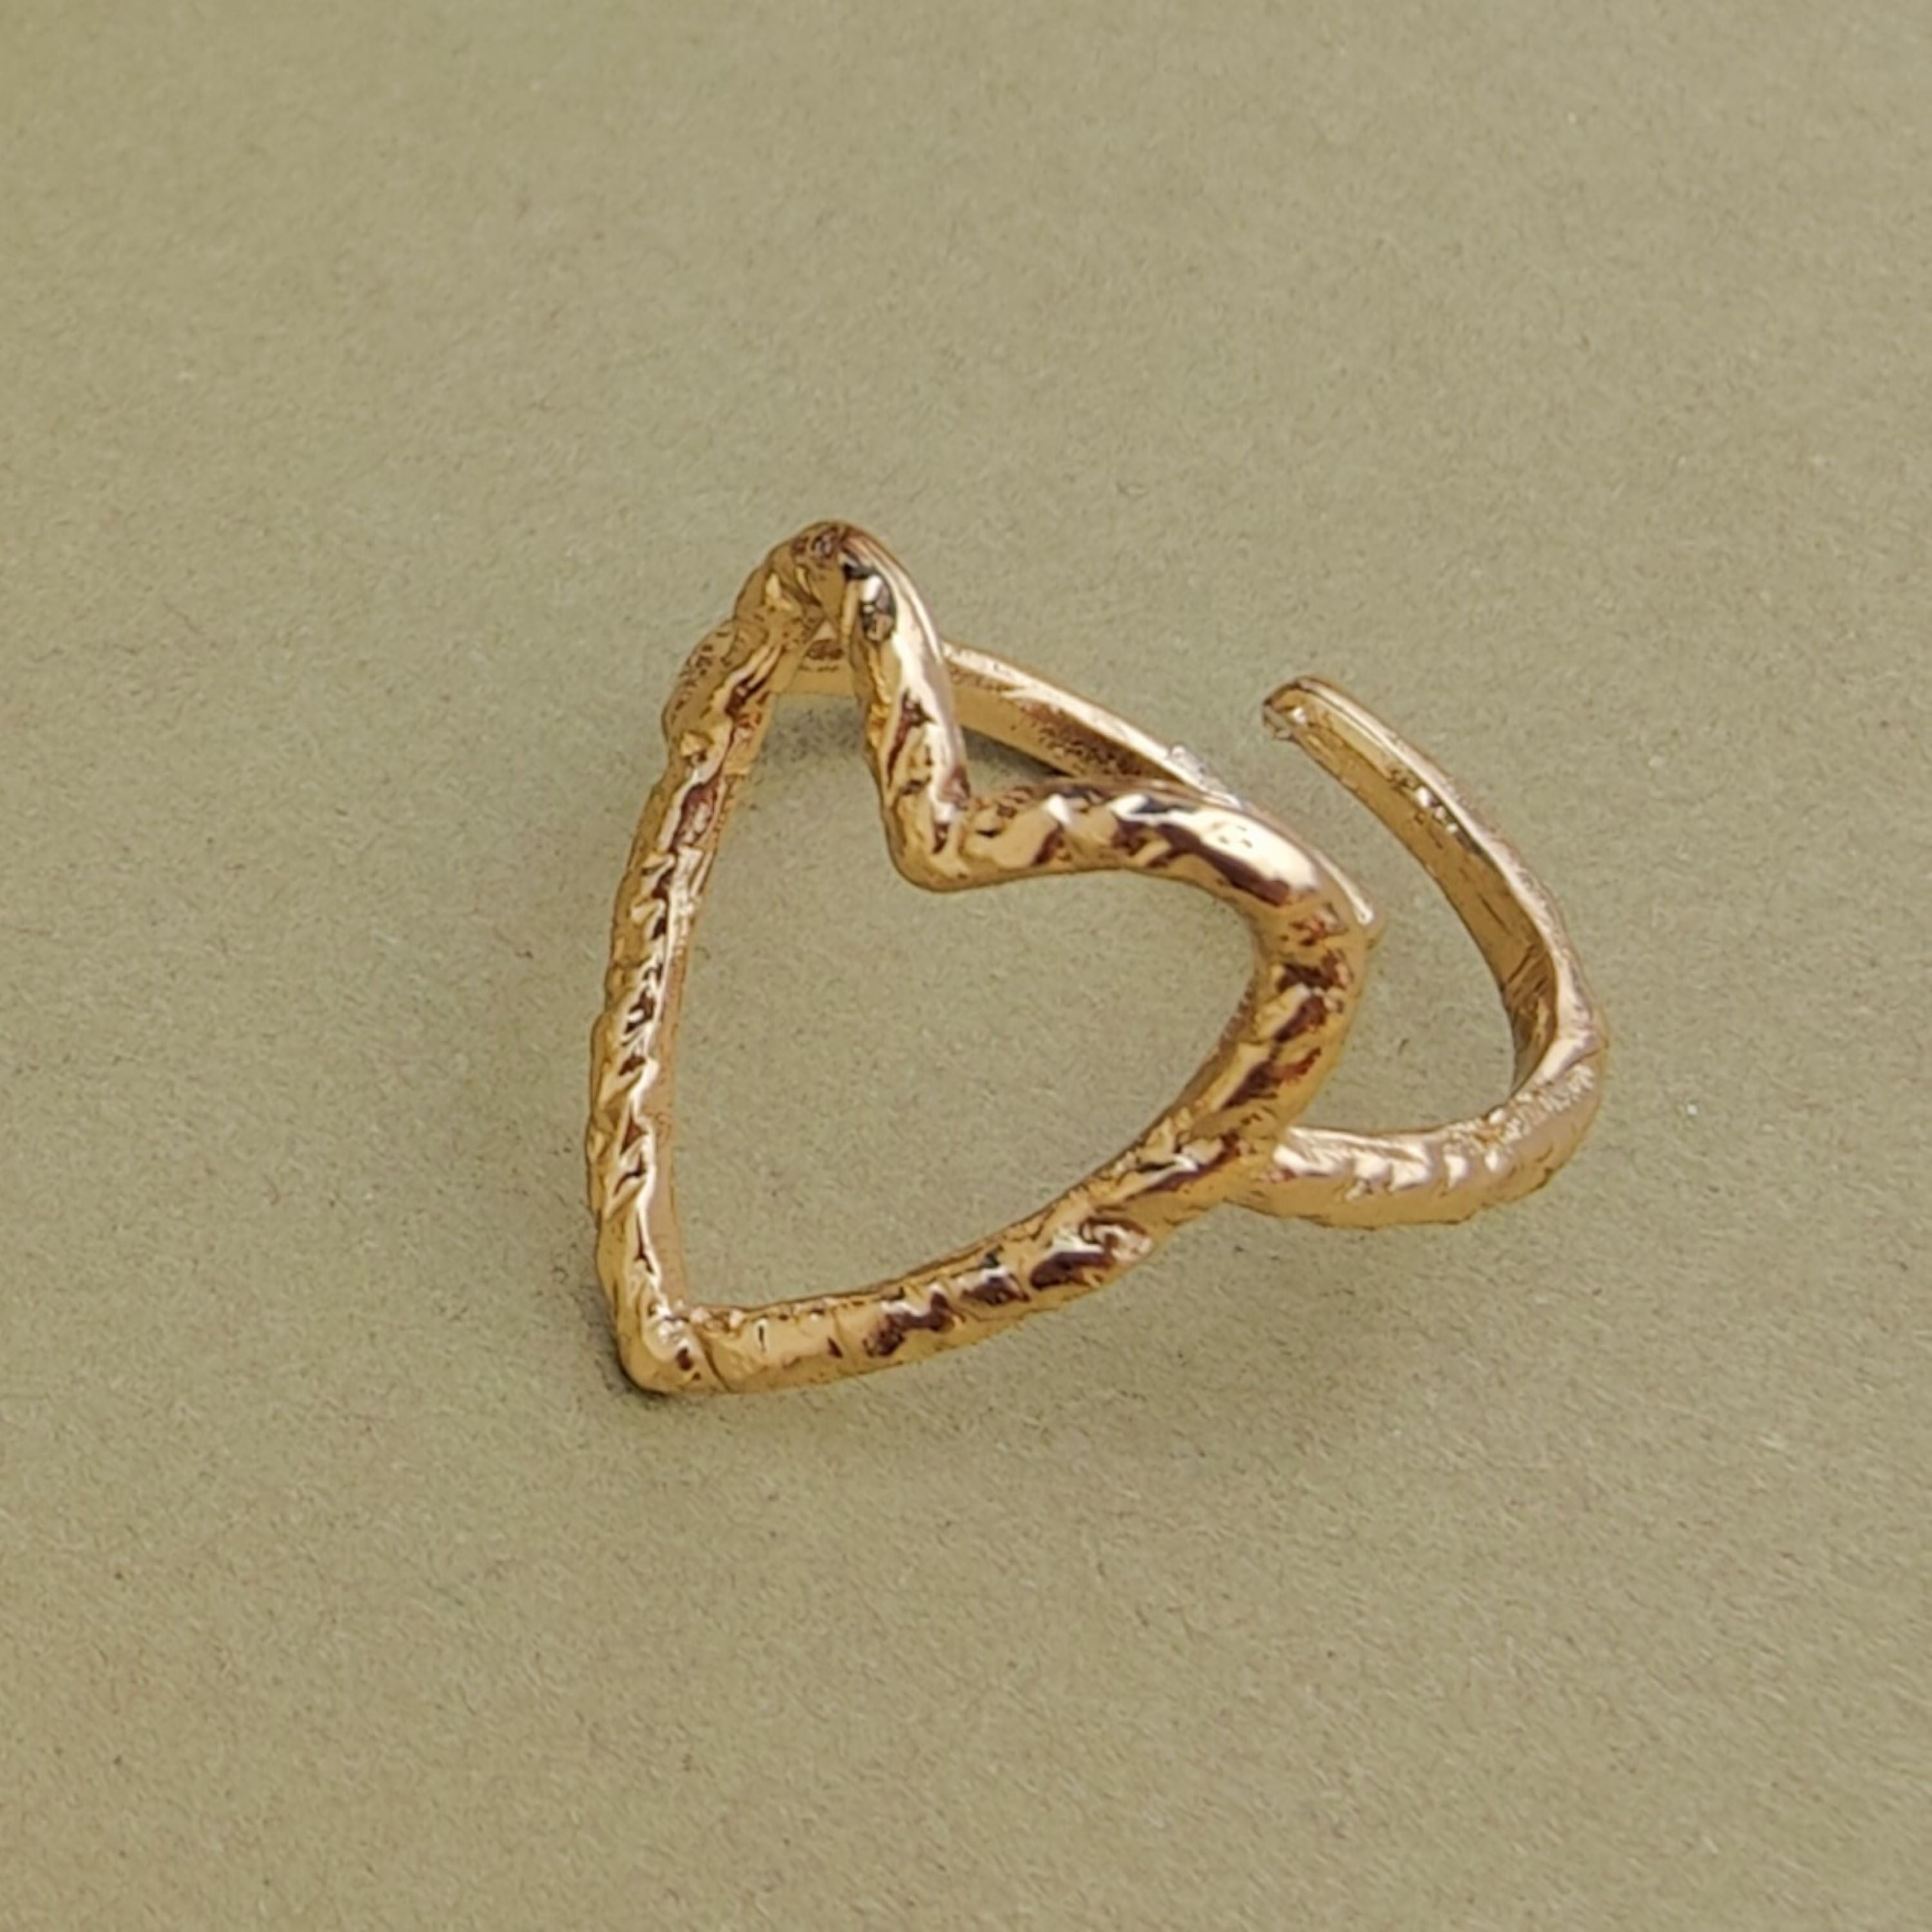 TFC Darling Heart Gold Plated Adjustable Ring- Elevate your style with our exquisite collection of gold-plated adjustable rings for women, including timeless signet rings. Explore cheapest fashion jewellery designs with anti-tarnish properties, all at The Fun Company with a touch of elegance